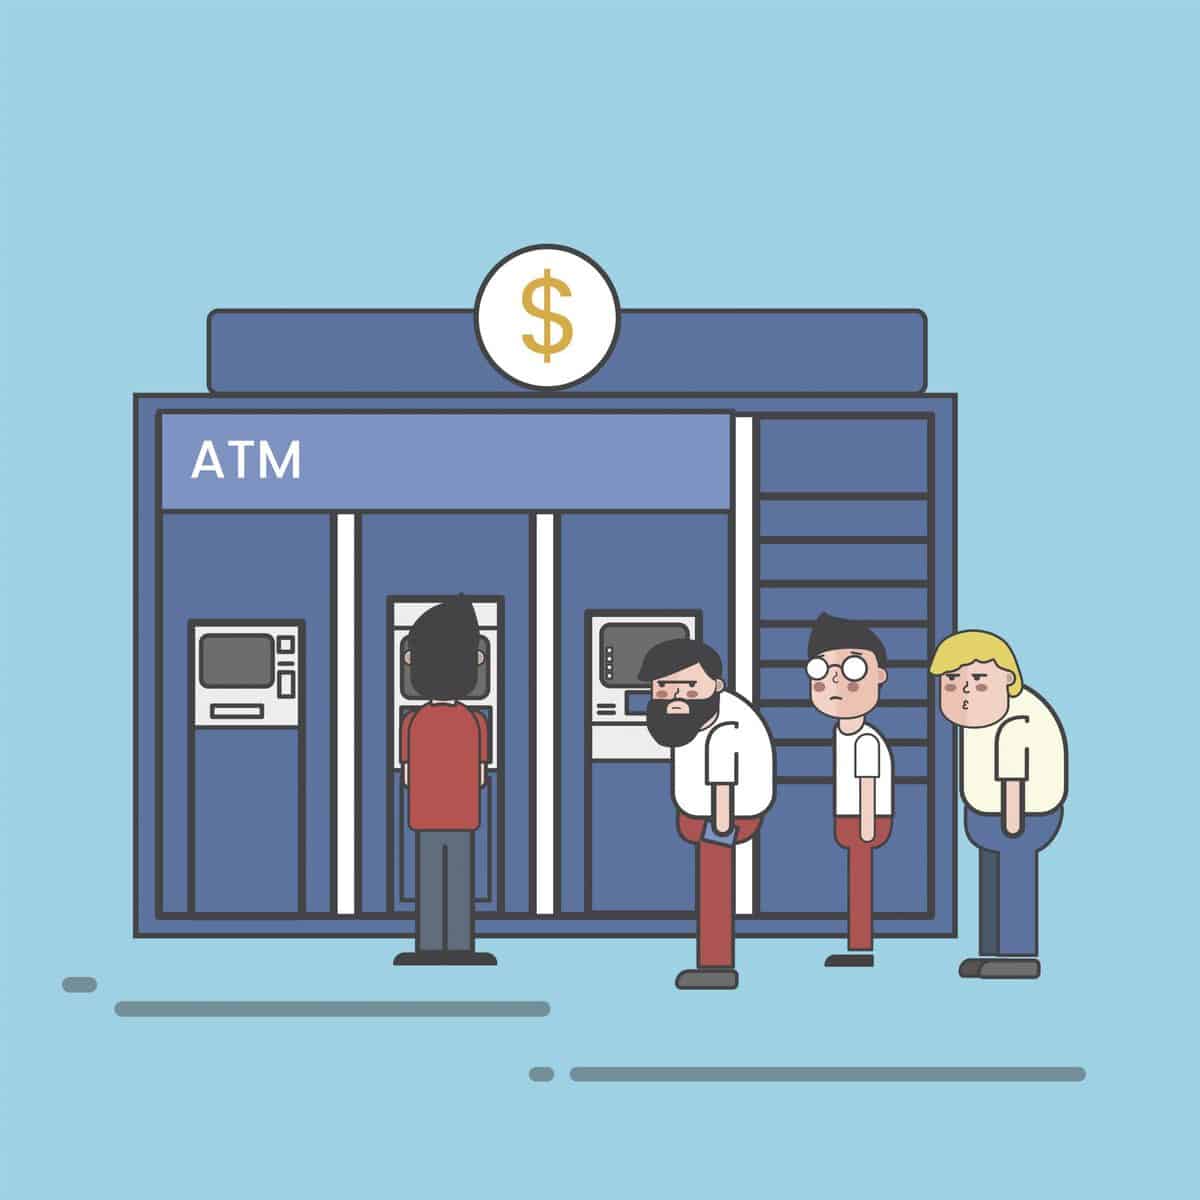 Three men lining up at the ATM waiting for one to finish withdrawing money.